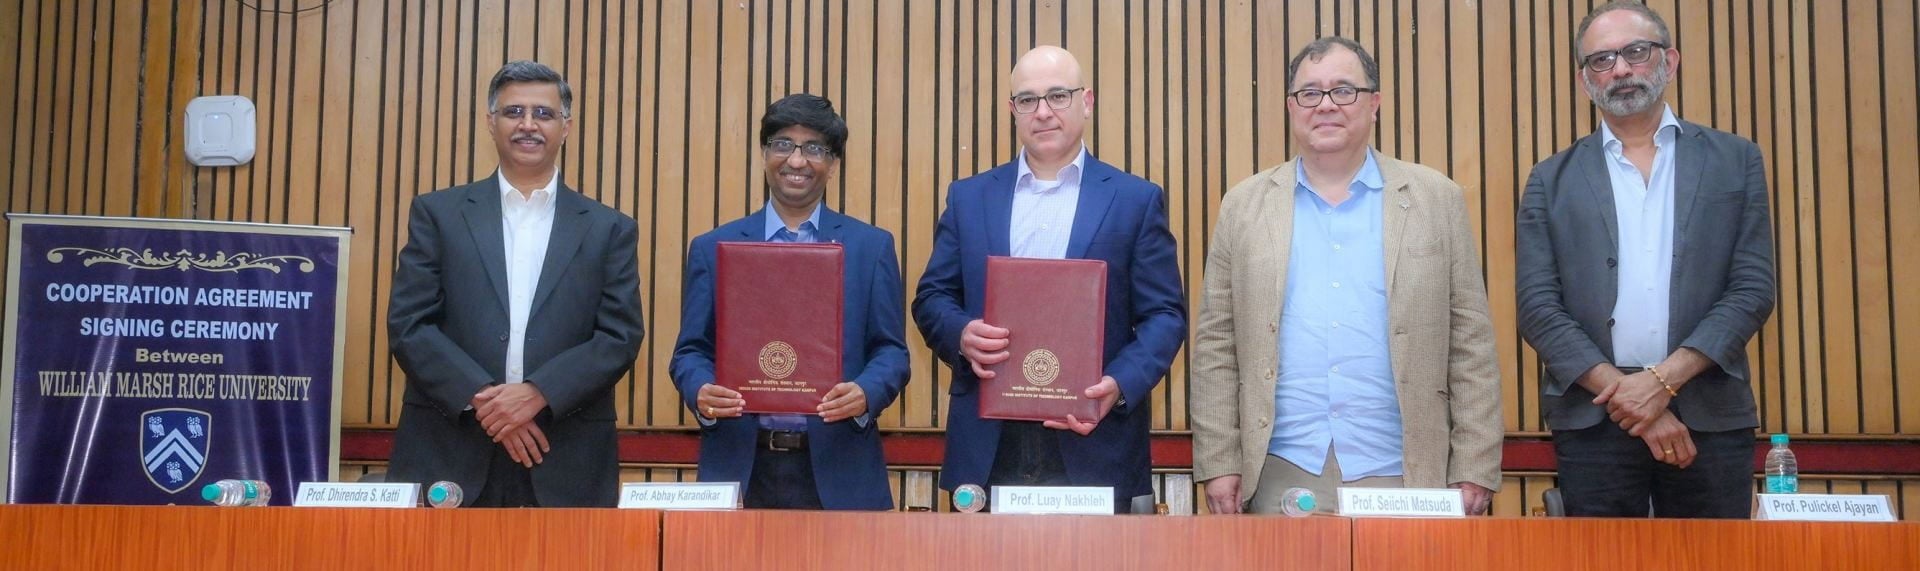 At the signing ceremony, from left: Professor Dhirendra Katti, dean of international relations at IITK; Professor Abhay Karandikar, IITK director; Luay Nakhleh, dean of the George R. Brown School of Engineering; Seiichi Matsuda, dean of graduate and postdoctoral studies at Rice, and Pulickel Ajayan, chair of Rice’s Department of Materials Science and NanoEngineering. Photo courtesy of IITK